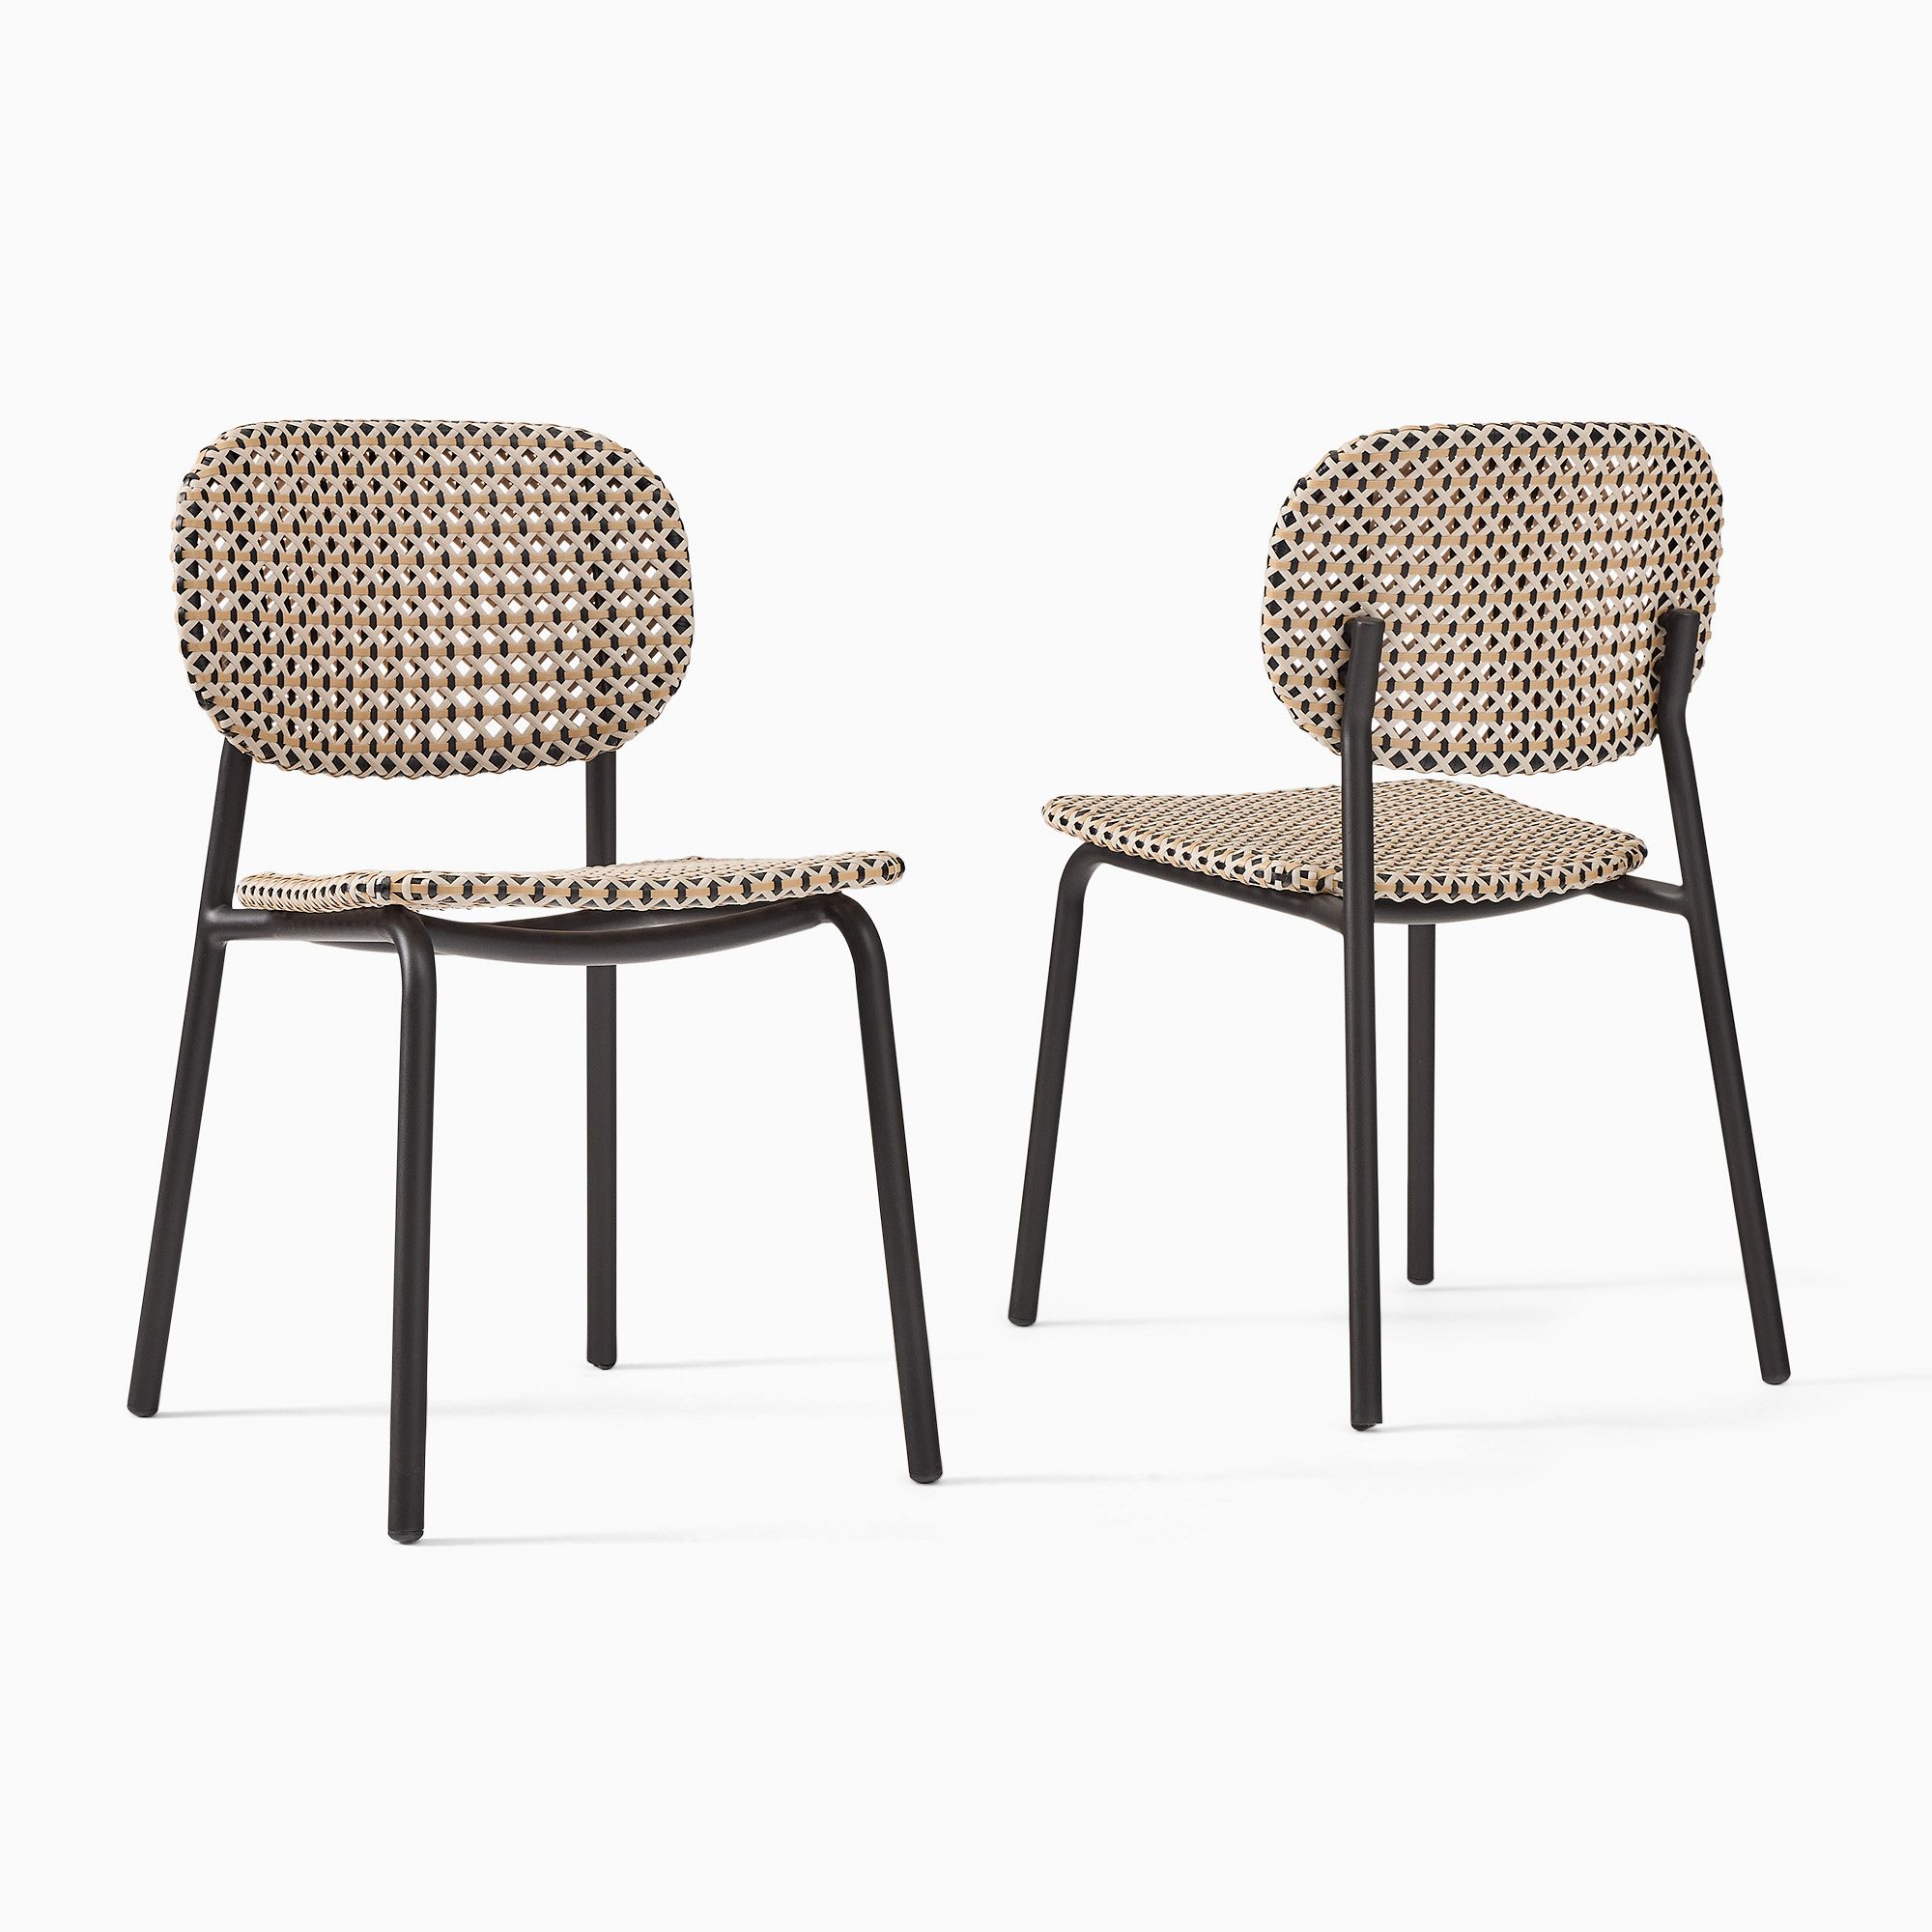 Seaview Outdoor Dining Chair (Set of 2) | West Elm